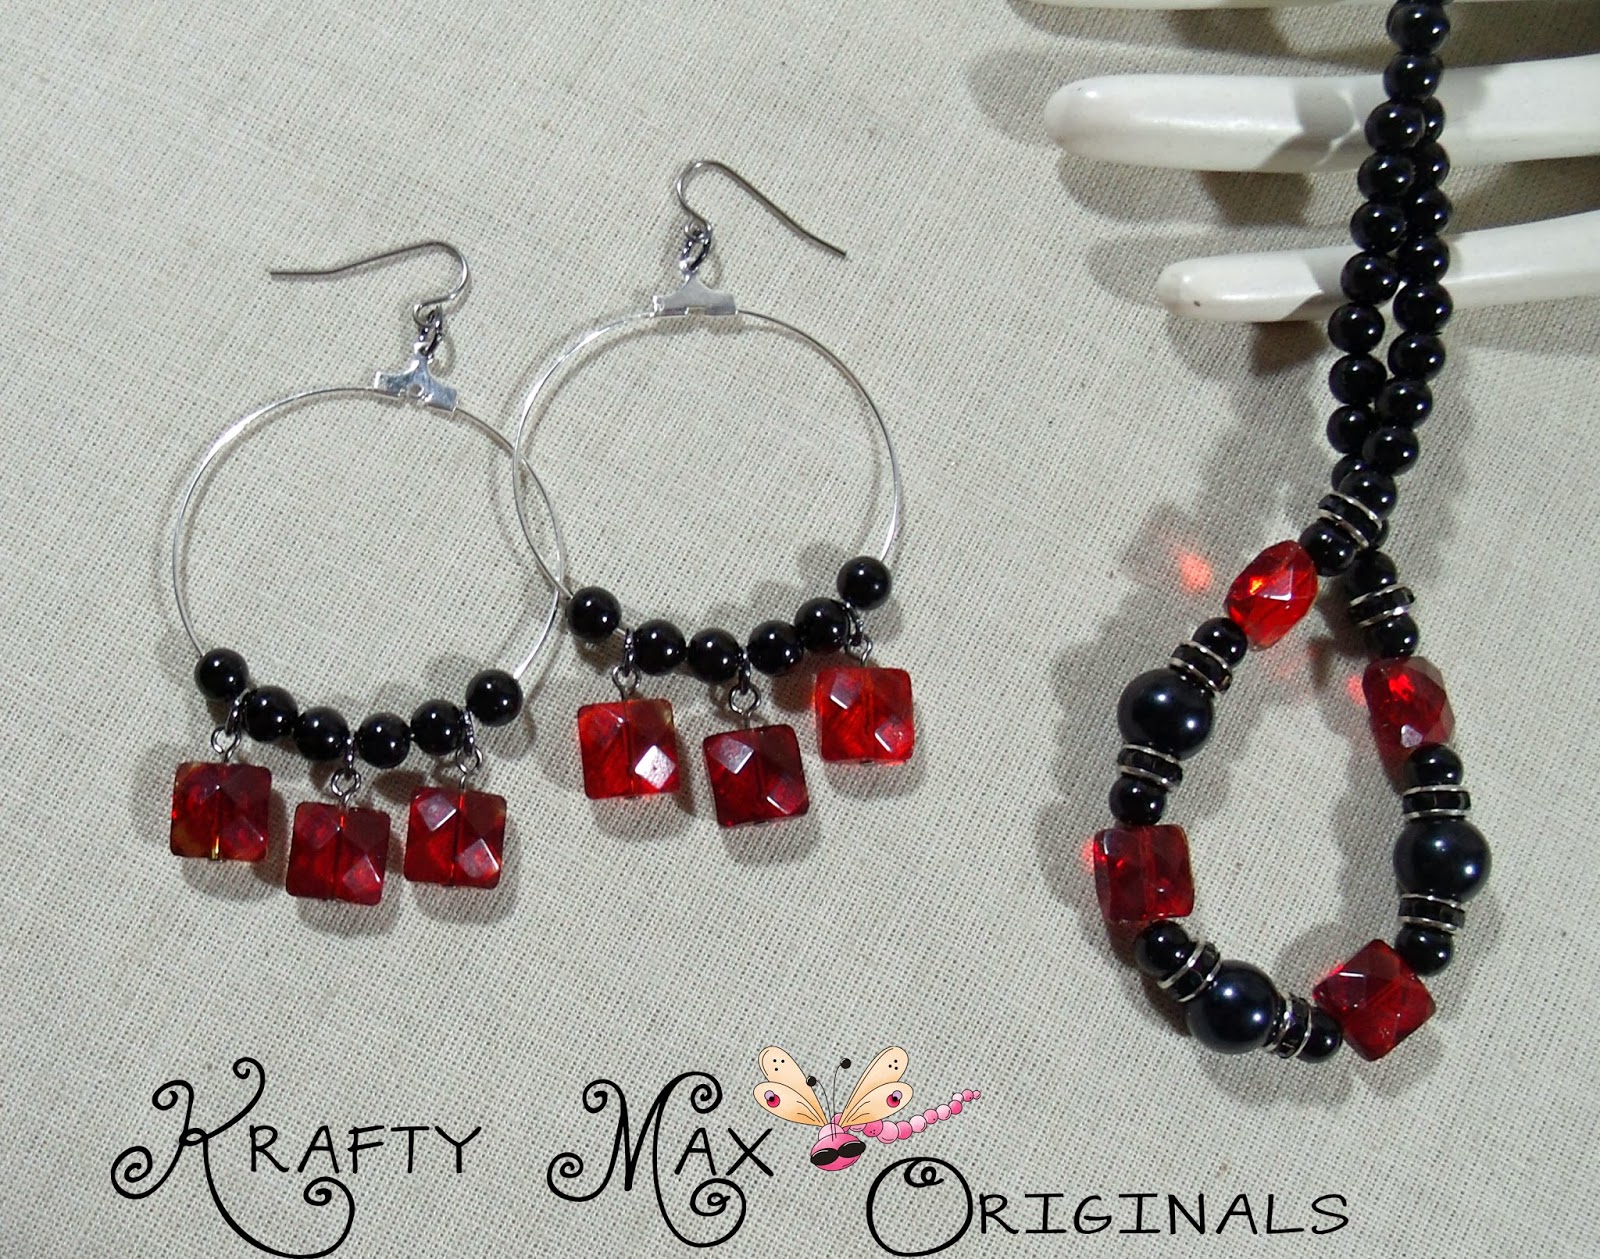 http://www.artfire.com/ext/shop/product_view/KraftyMax/8261951/red_and_black_beauty_prima_beads_blog_team_necklace_set/handmade/jewelry/sets/glass